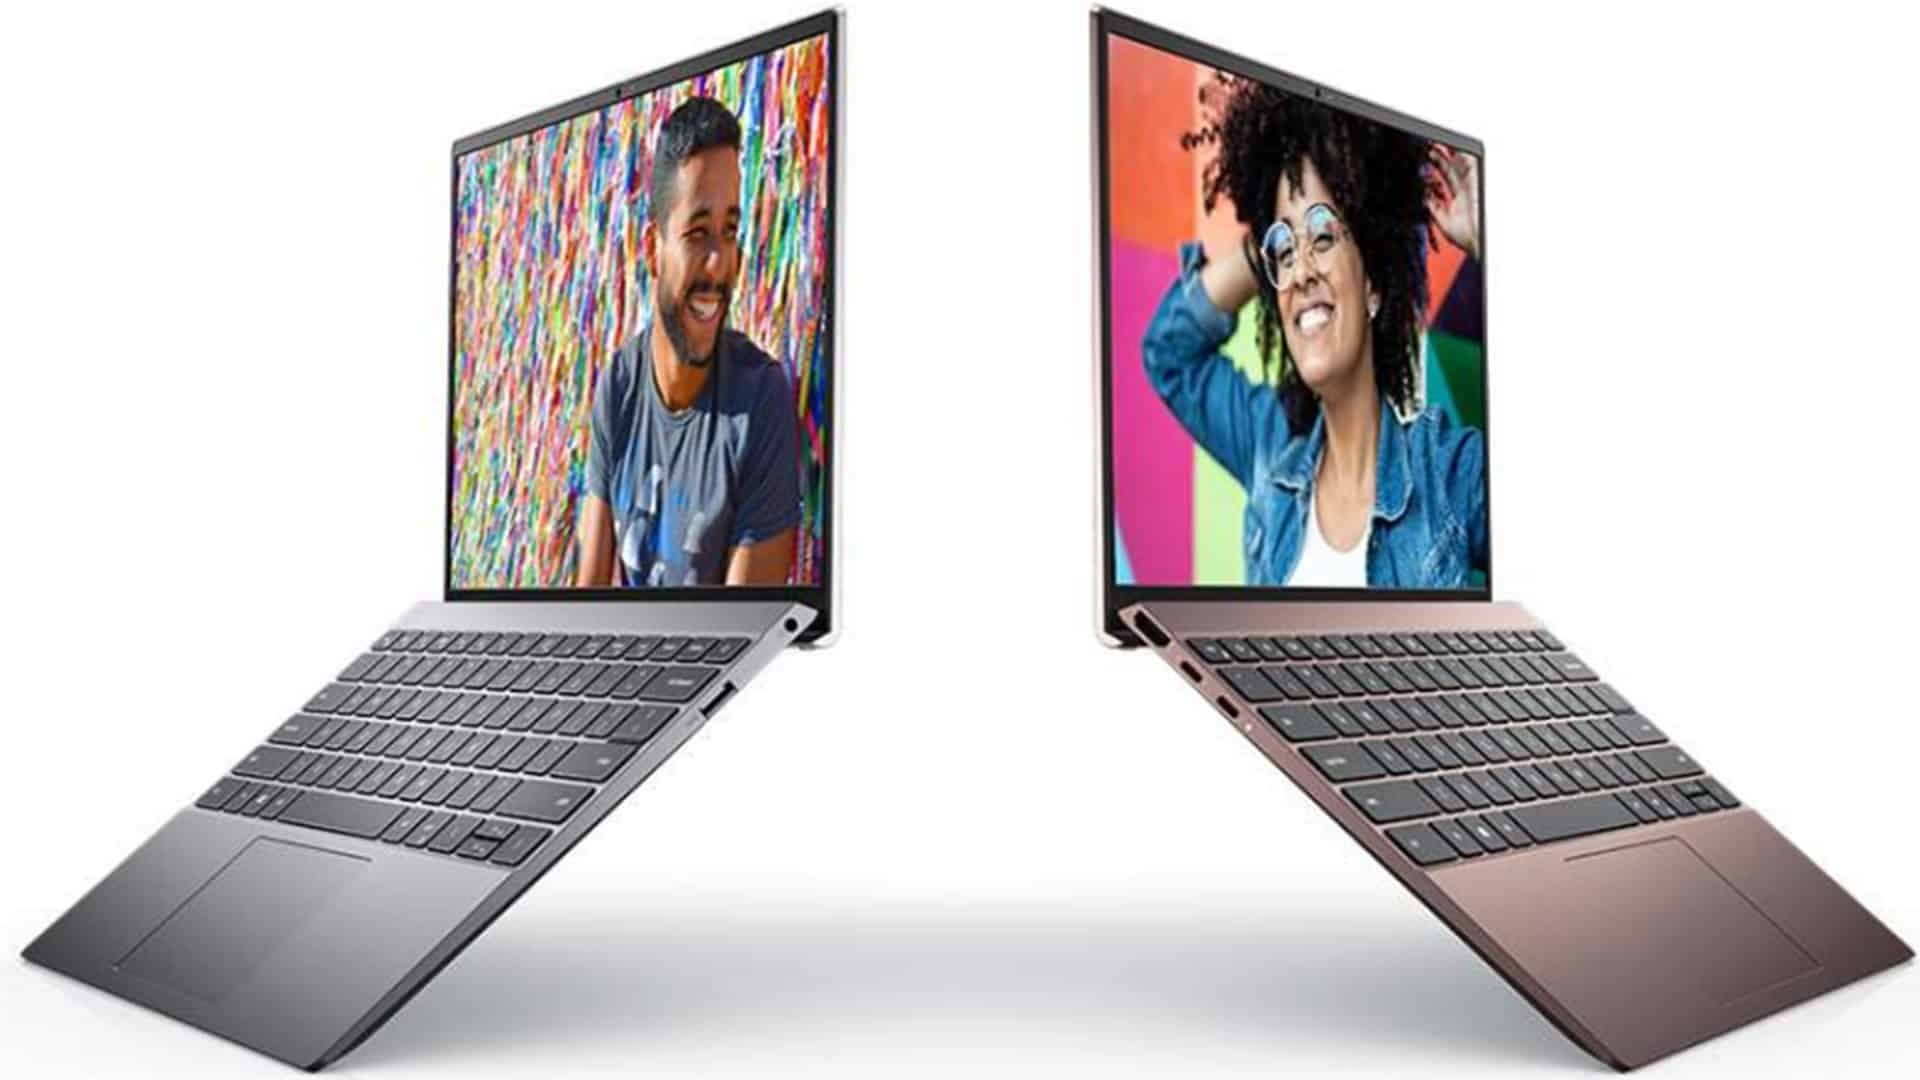 Dell Technologies enables versatile digital lifestyle for consumers with new Inspiron series